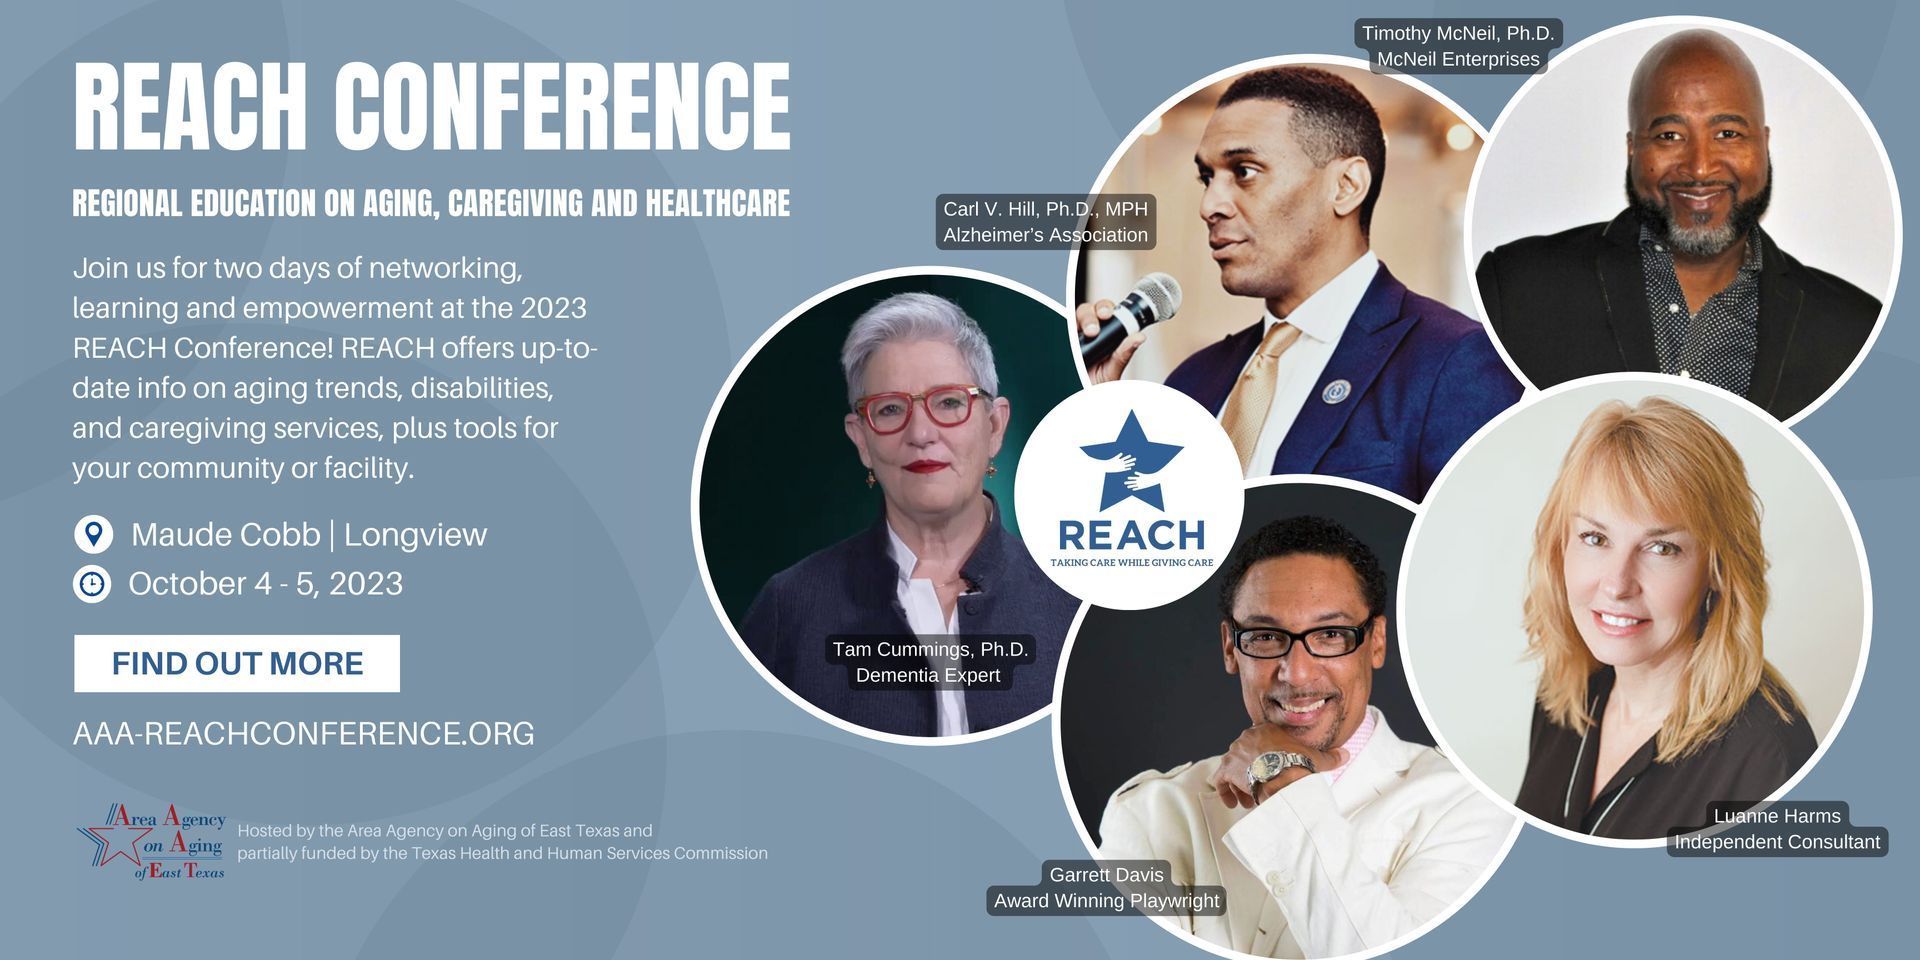 Keynote Speakers Announced for 2023 REACH Conference